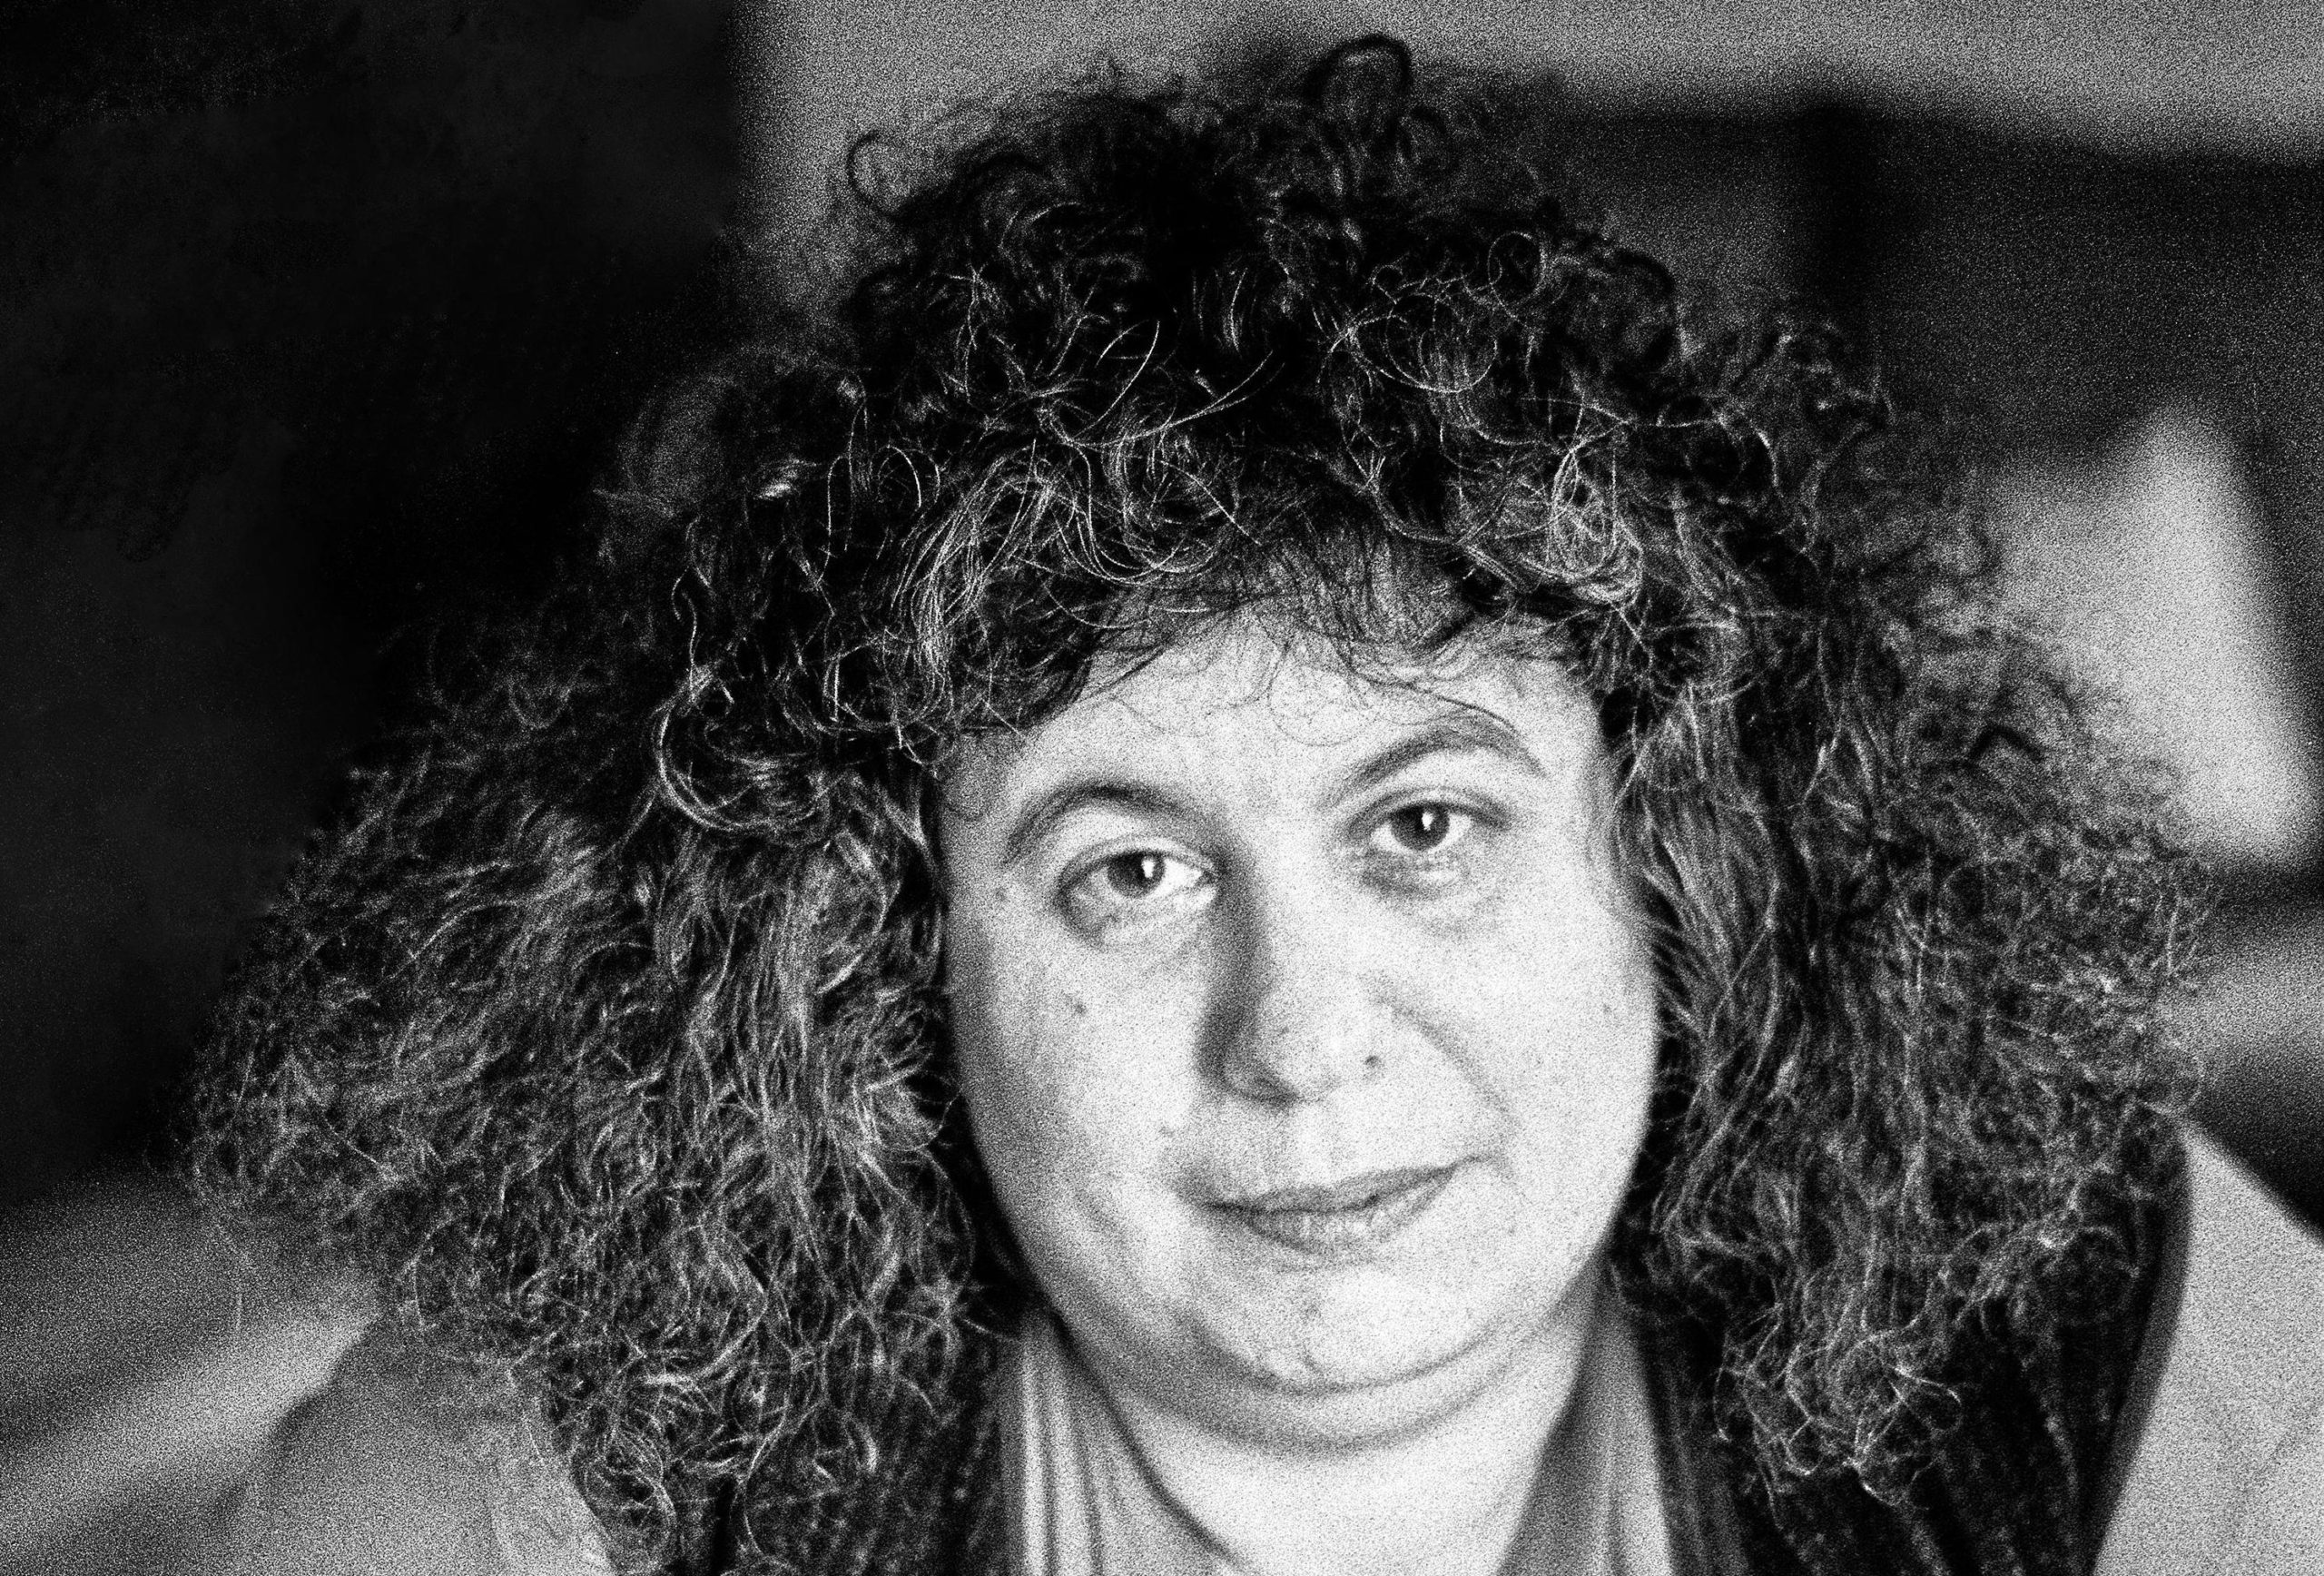 Aly Sinclair Shemale - Andrea Dworkin Was a Trans Ally - Boston Review